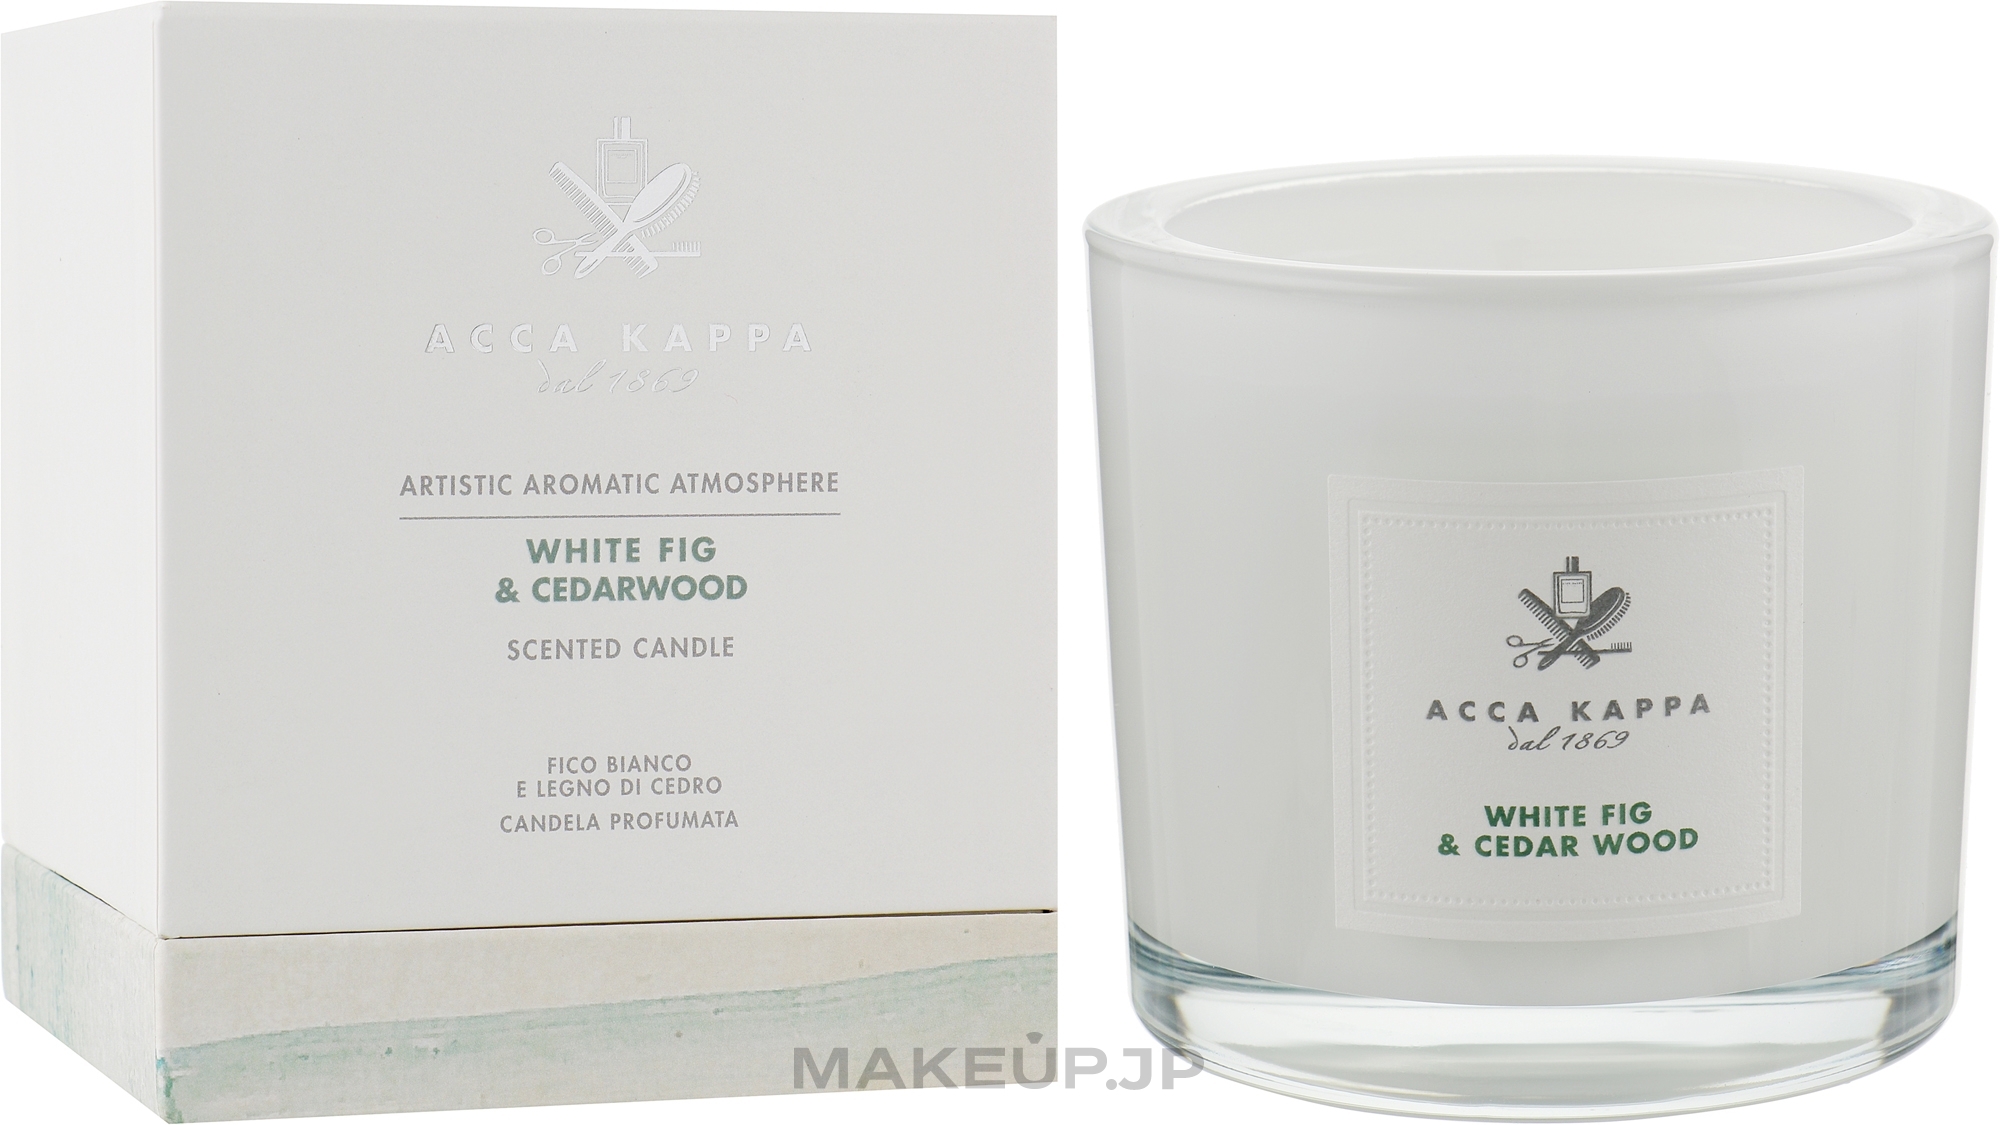 White Fig & Cederwood Scented Candle - Acca Kappa Scented Candle — photo 180 g